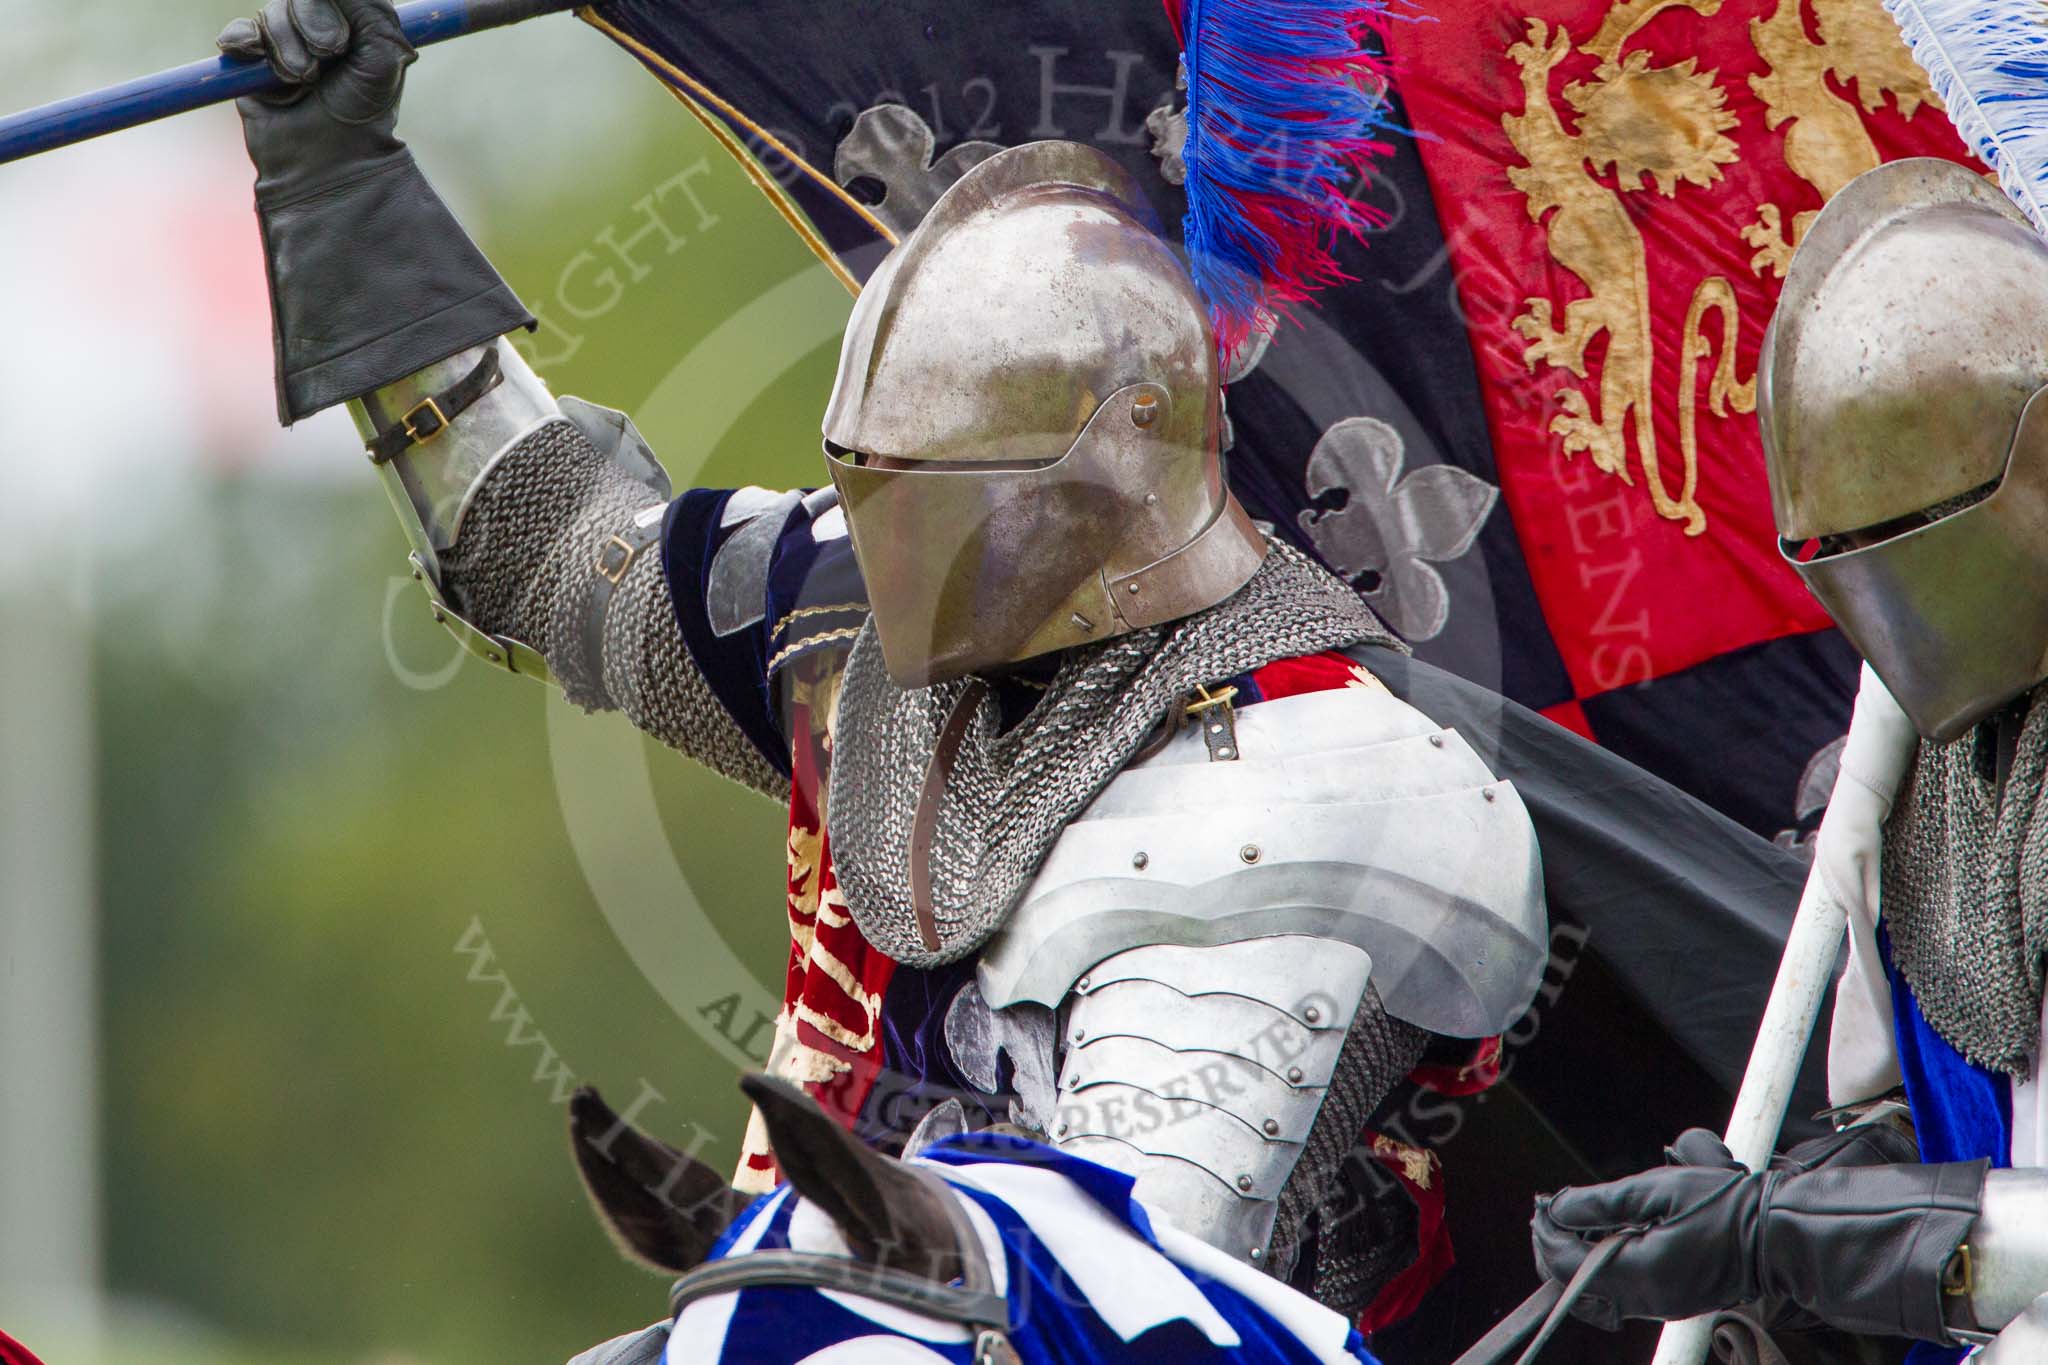 DBPC Polo in the Park 2012: The Knights of Middle England and their Jousting display..
Dallas Burston Polo Club,
Stoneythorpe Estate,
Southam,
Warwickshire,
United Kingdom,
on 16 September 2012 at 14:14, image #178